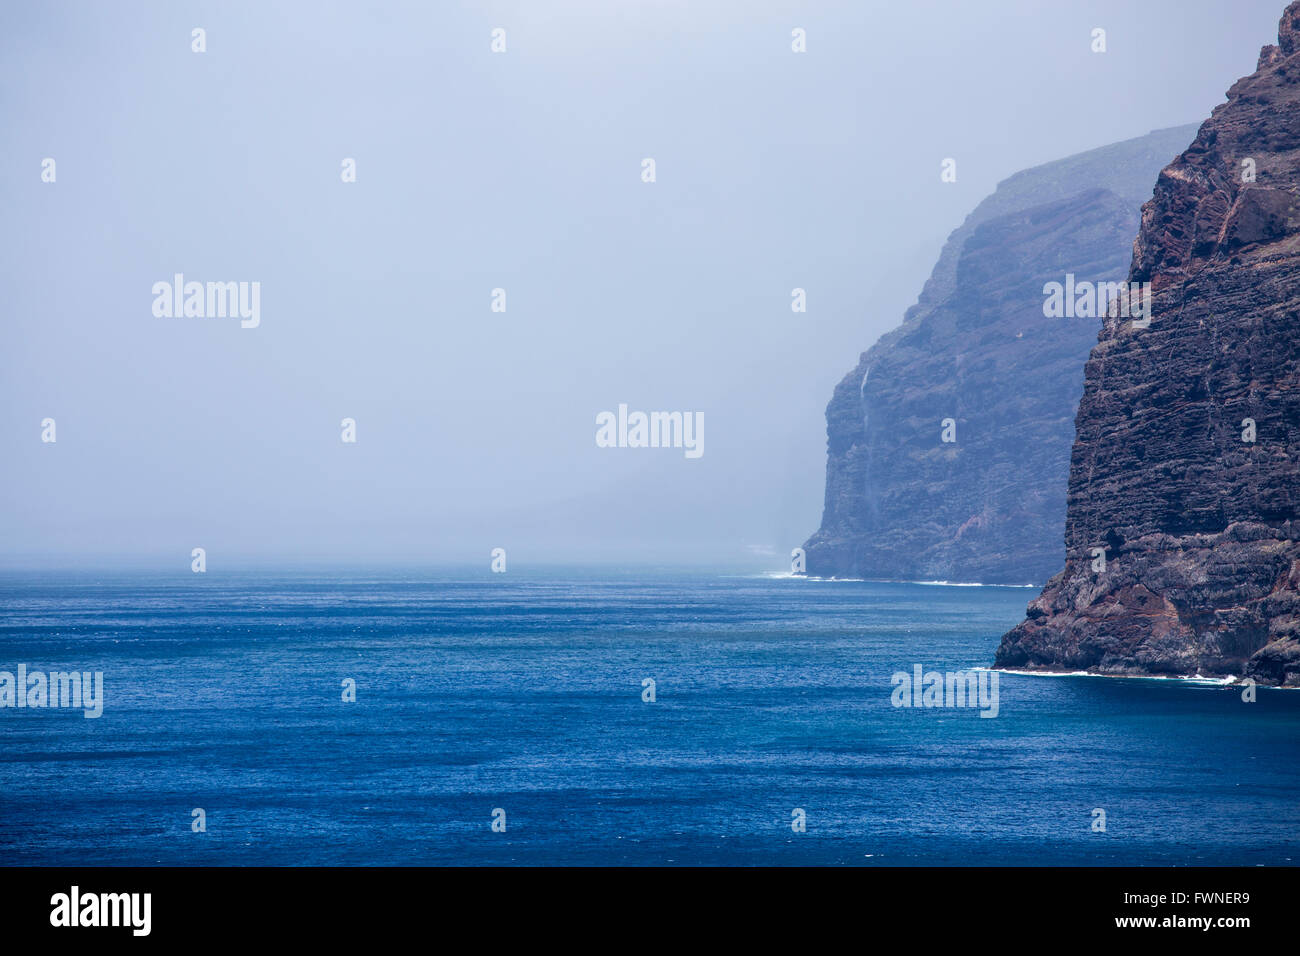 A Wet and windy weather at the cliffs of Los Gigantes, normally a sunny holiday resort in Tenerife, Canary Islands, Spain. Stock Photo